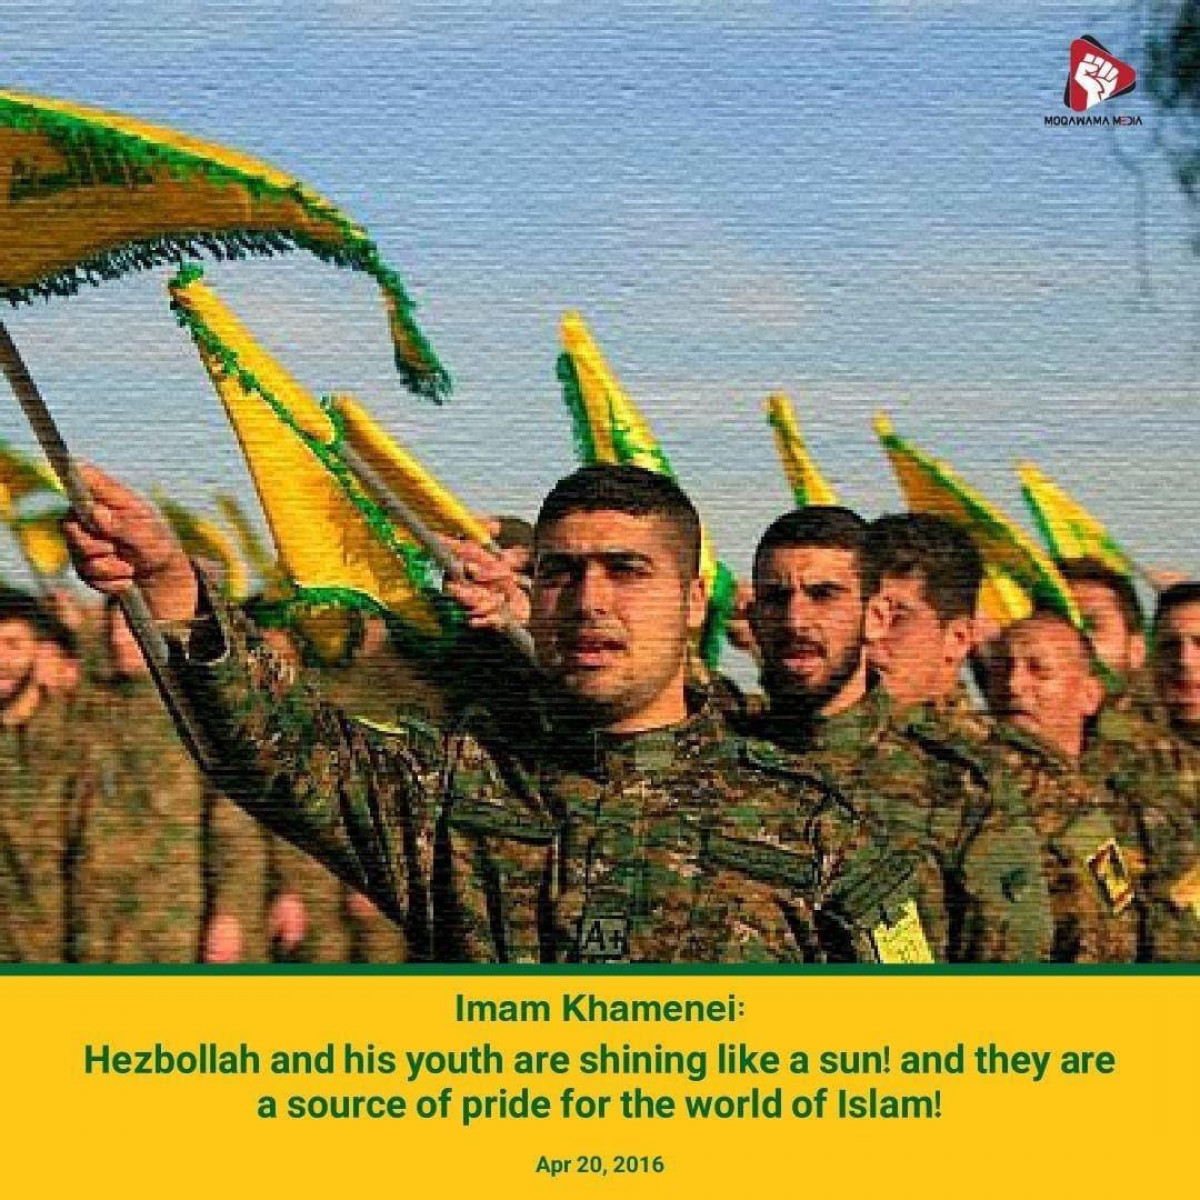 Hezbollah and his youth are shining like a sun!